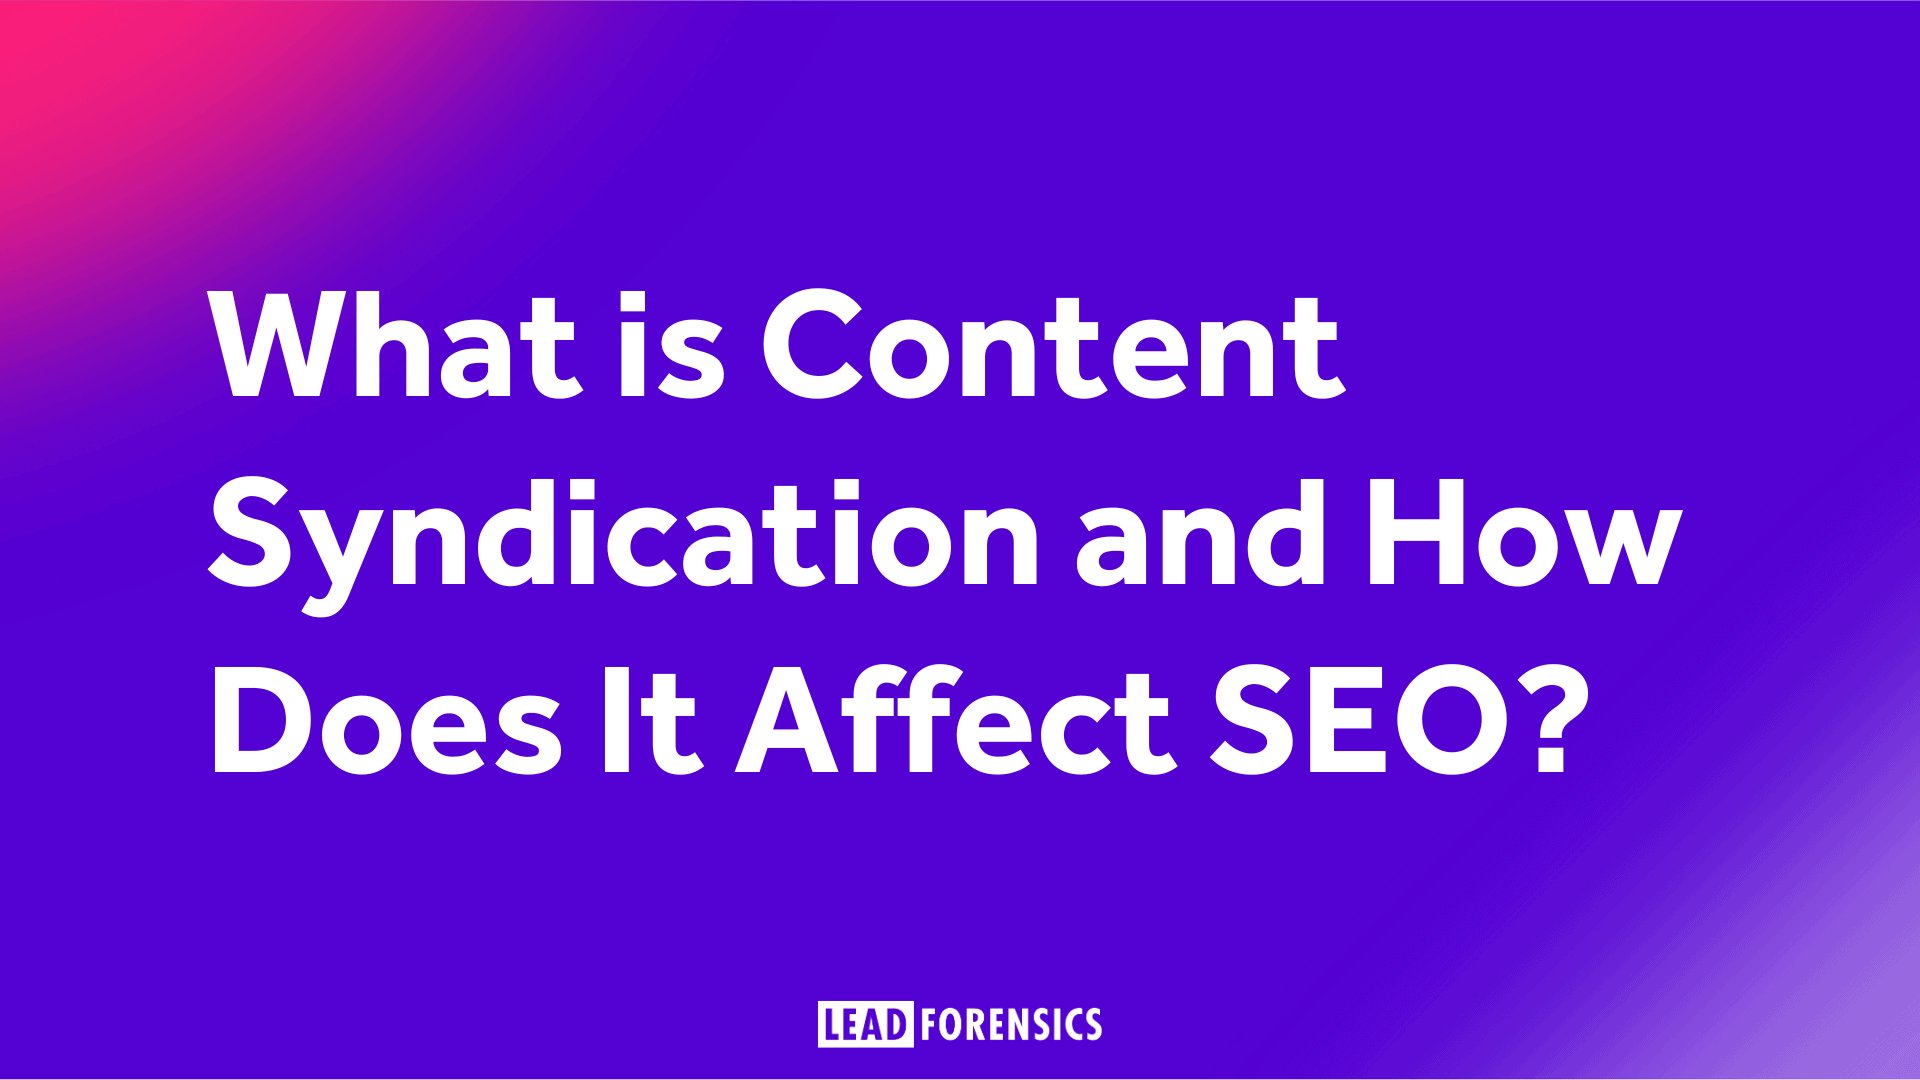 What is Content Syndication and How Does It Affect SEO